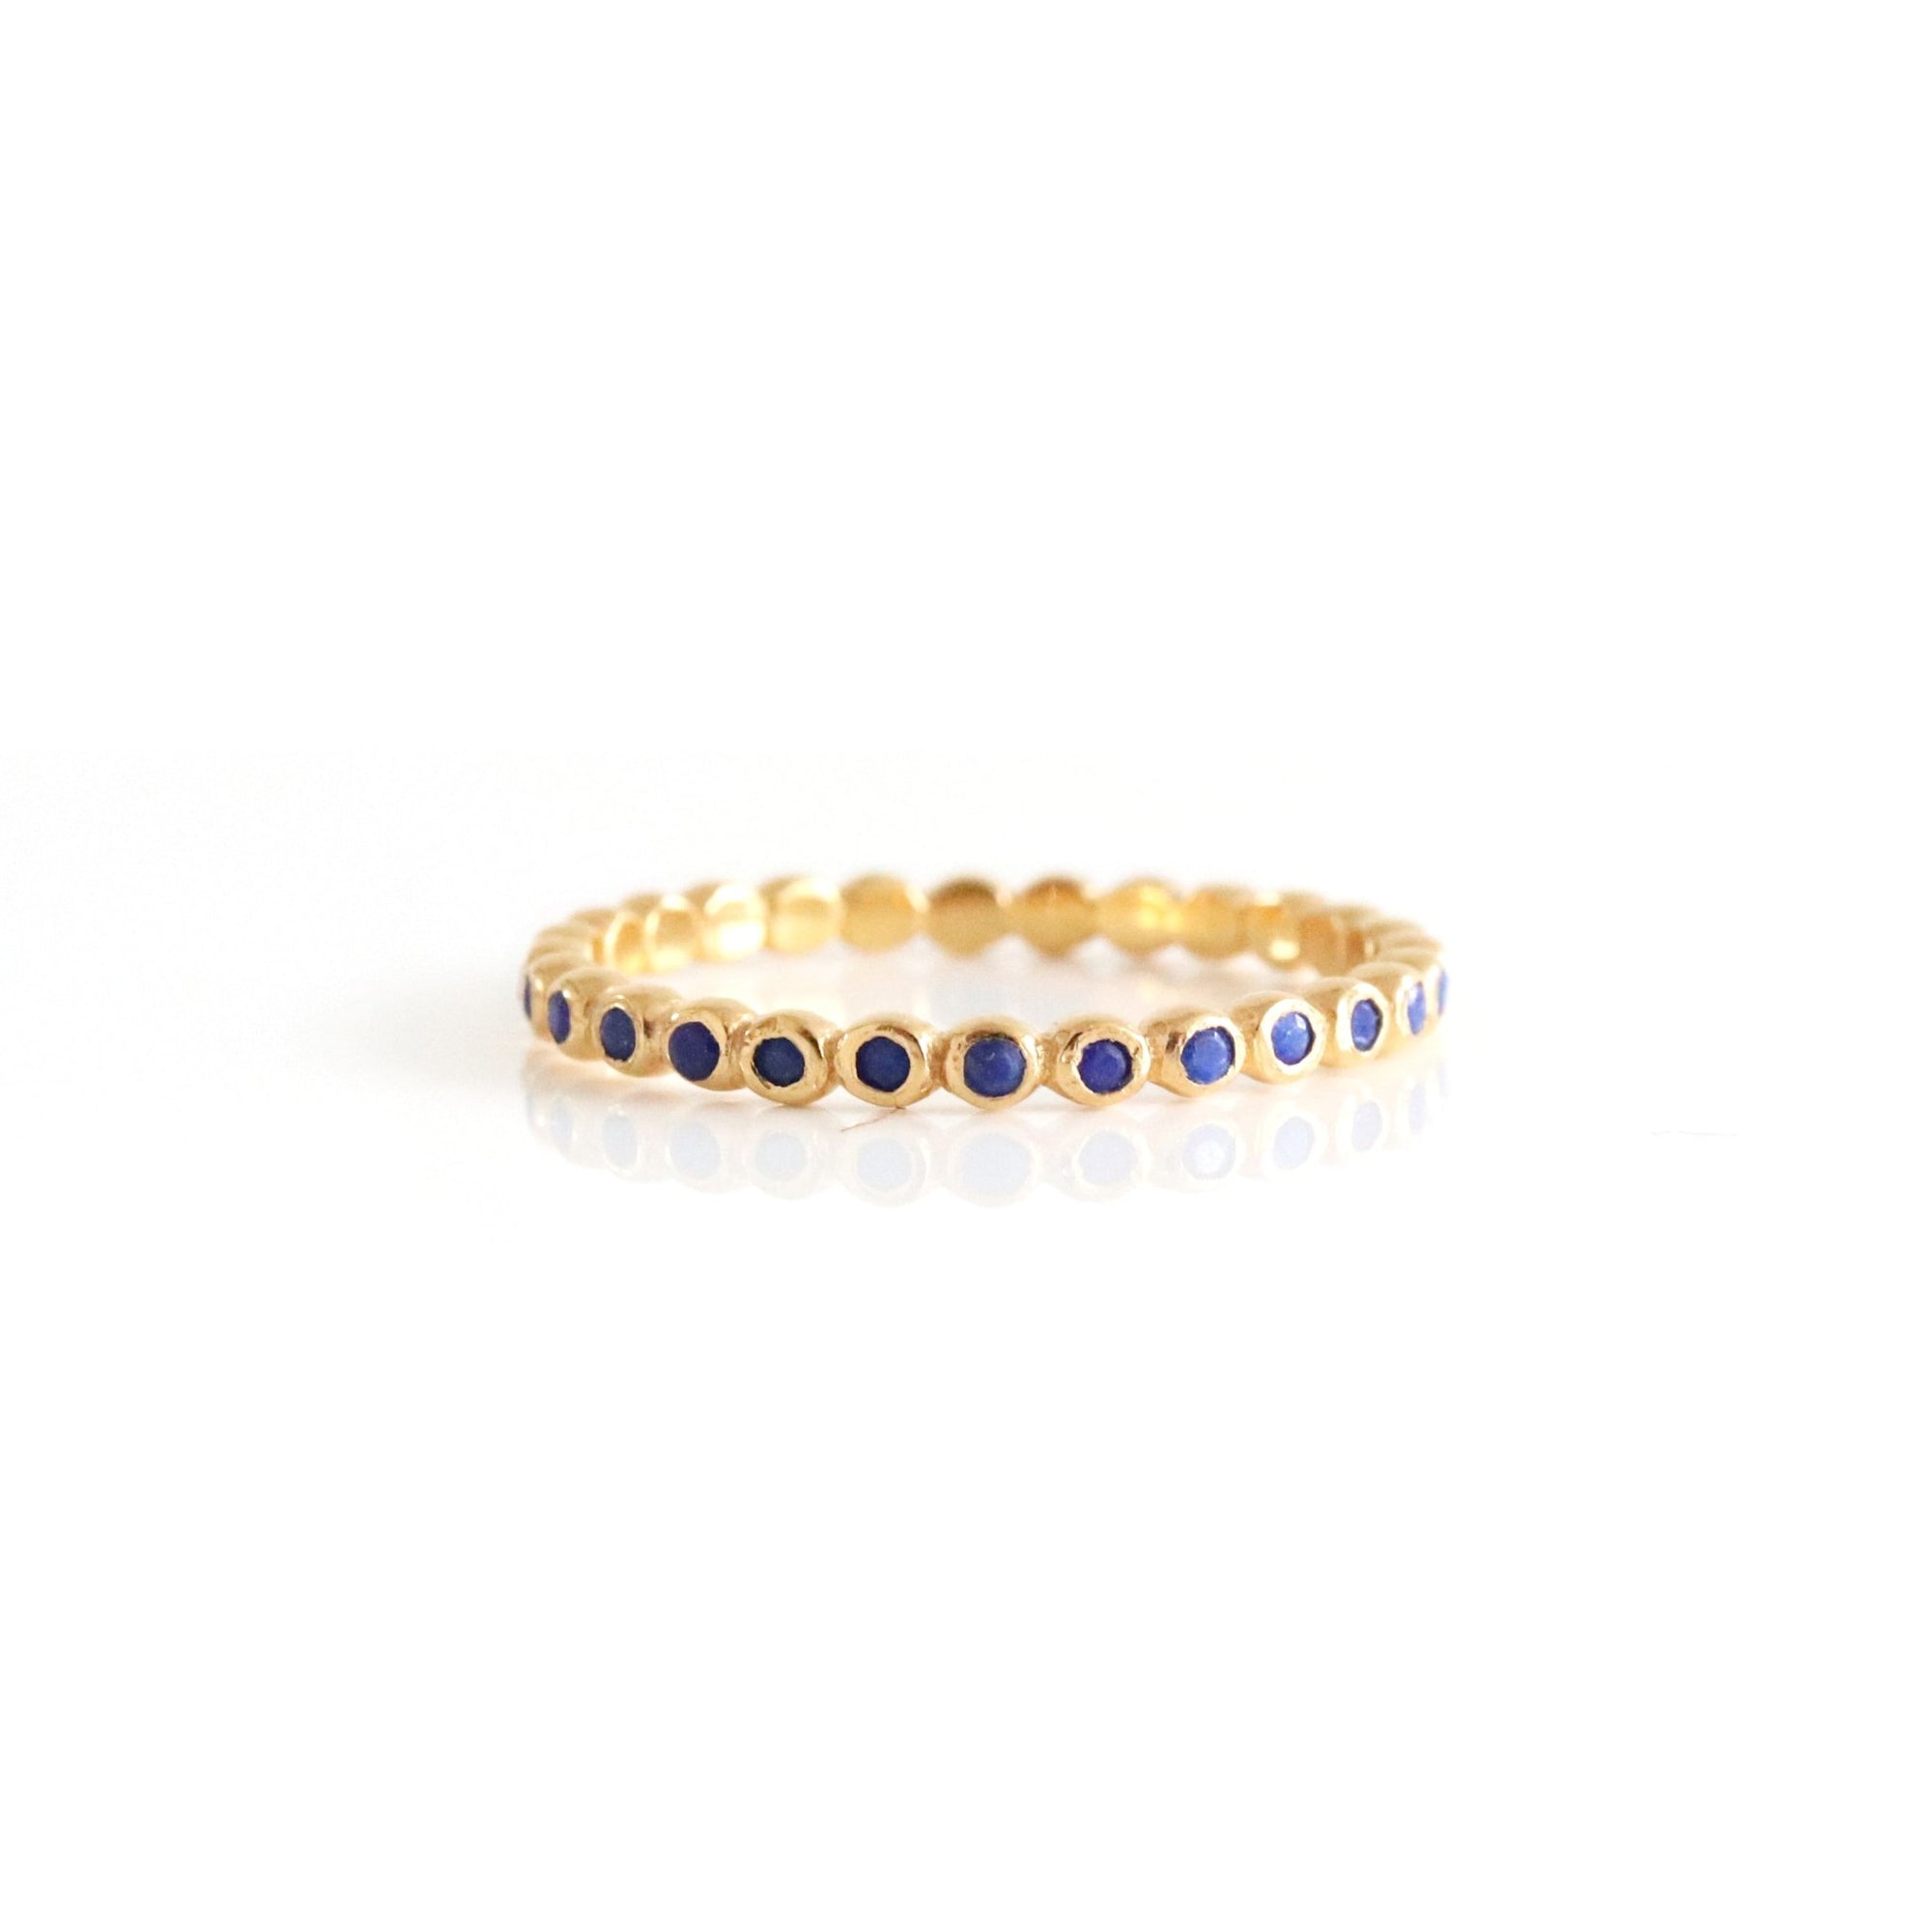 LOVE THIN DISK BAND RING - LAPIS & GOLD - SO PRETTY CARA COTTER